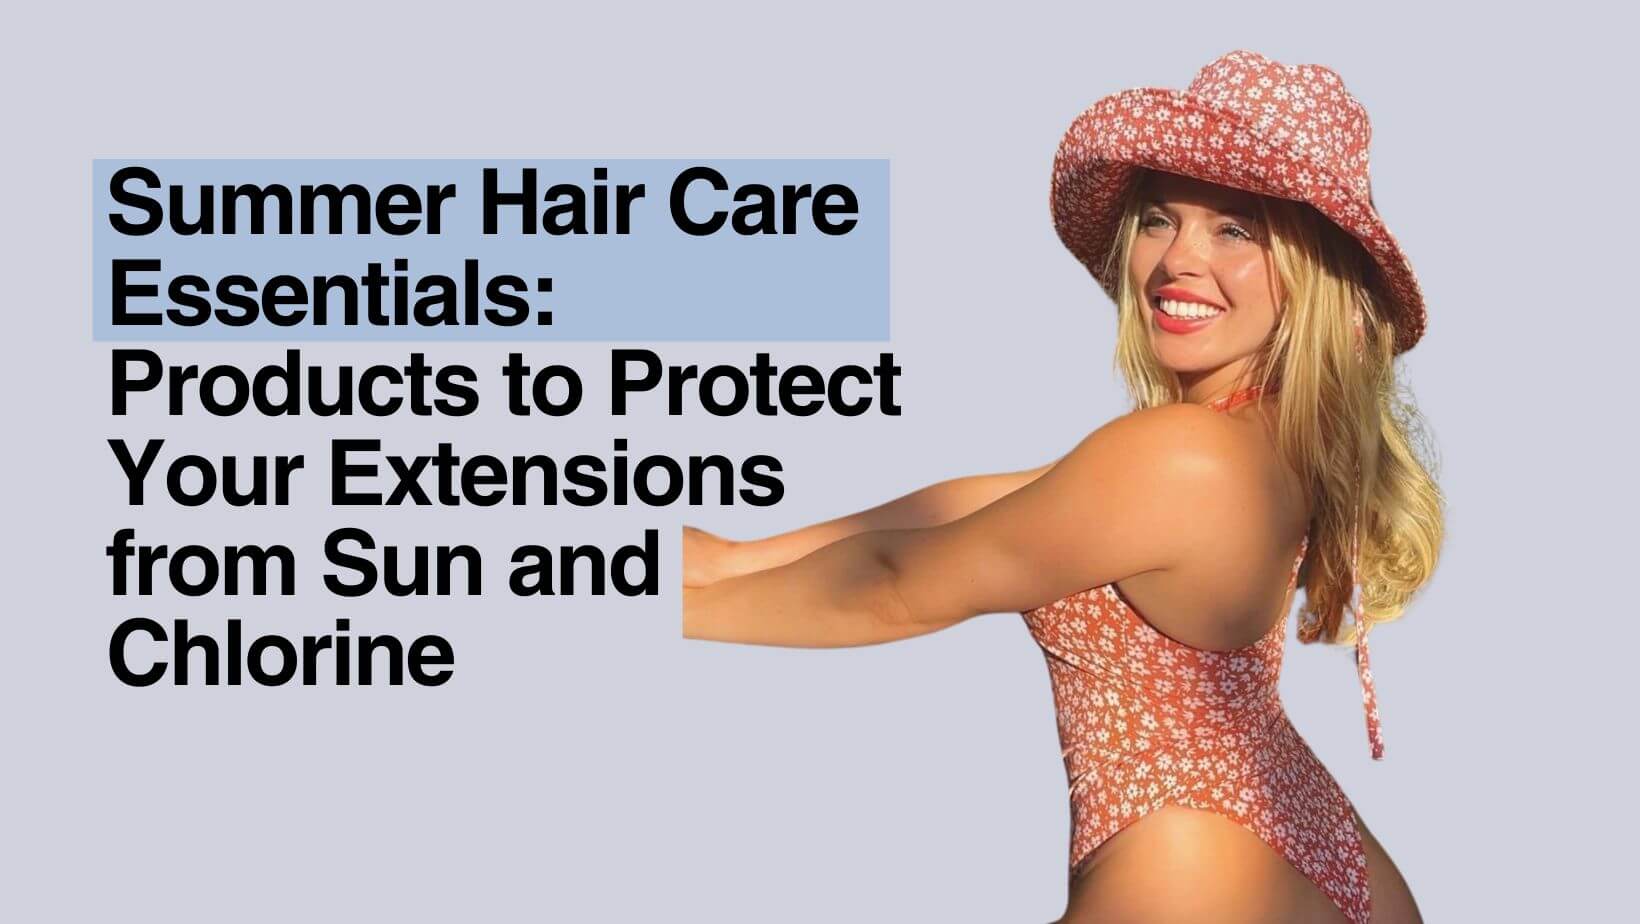 Summer Hair Care Tips For Your Hair Extensions